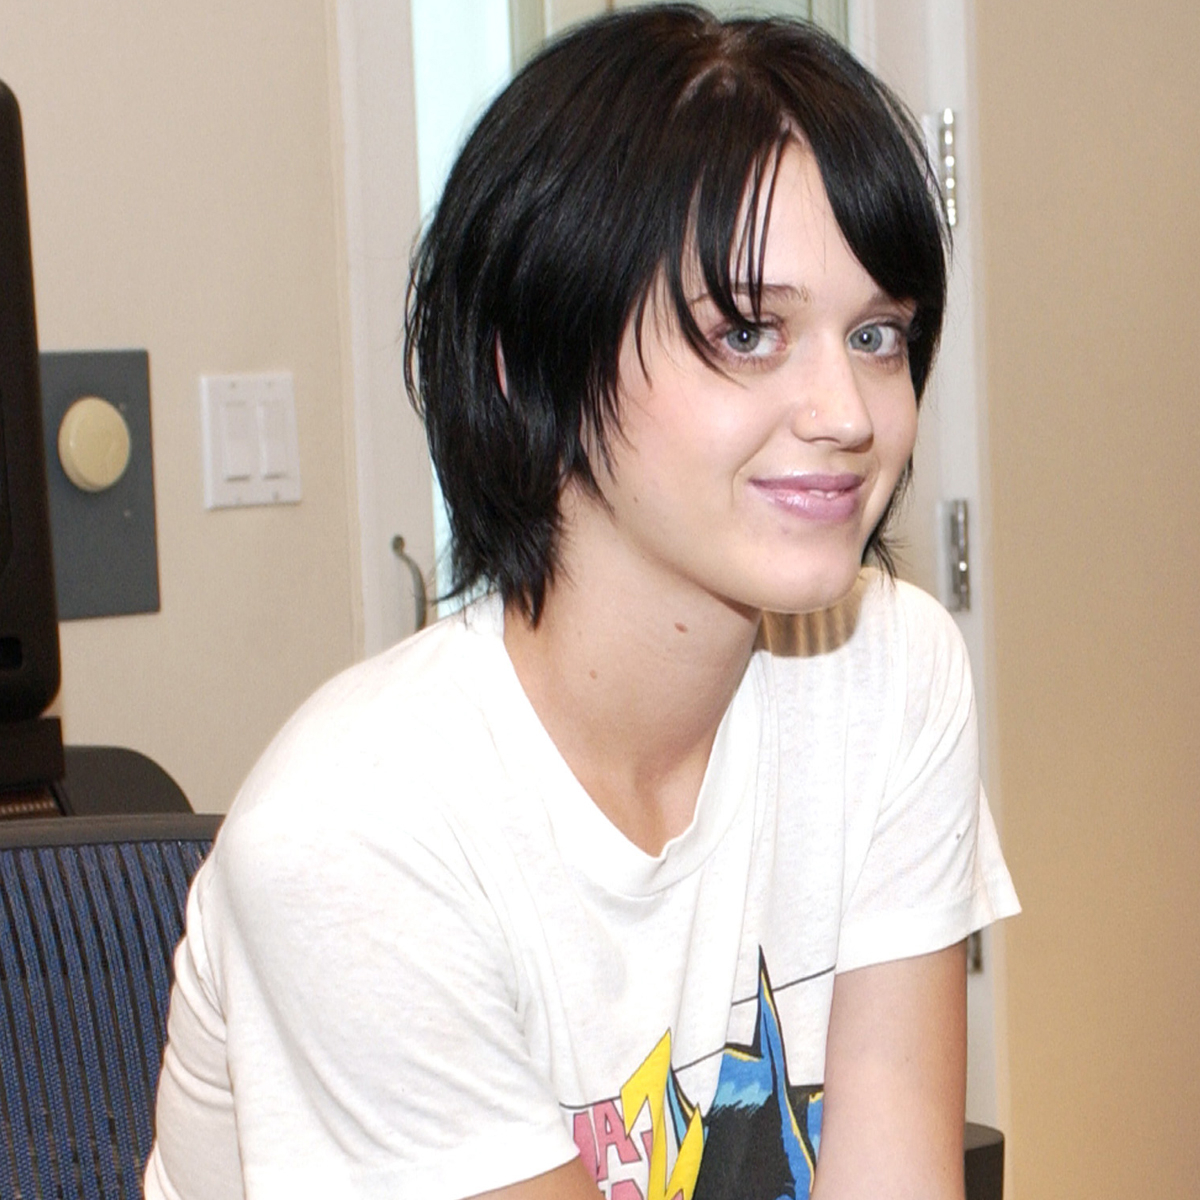 When Katy Perry was Katy Hudson: remembering her debut Christian album